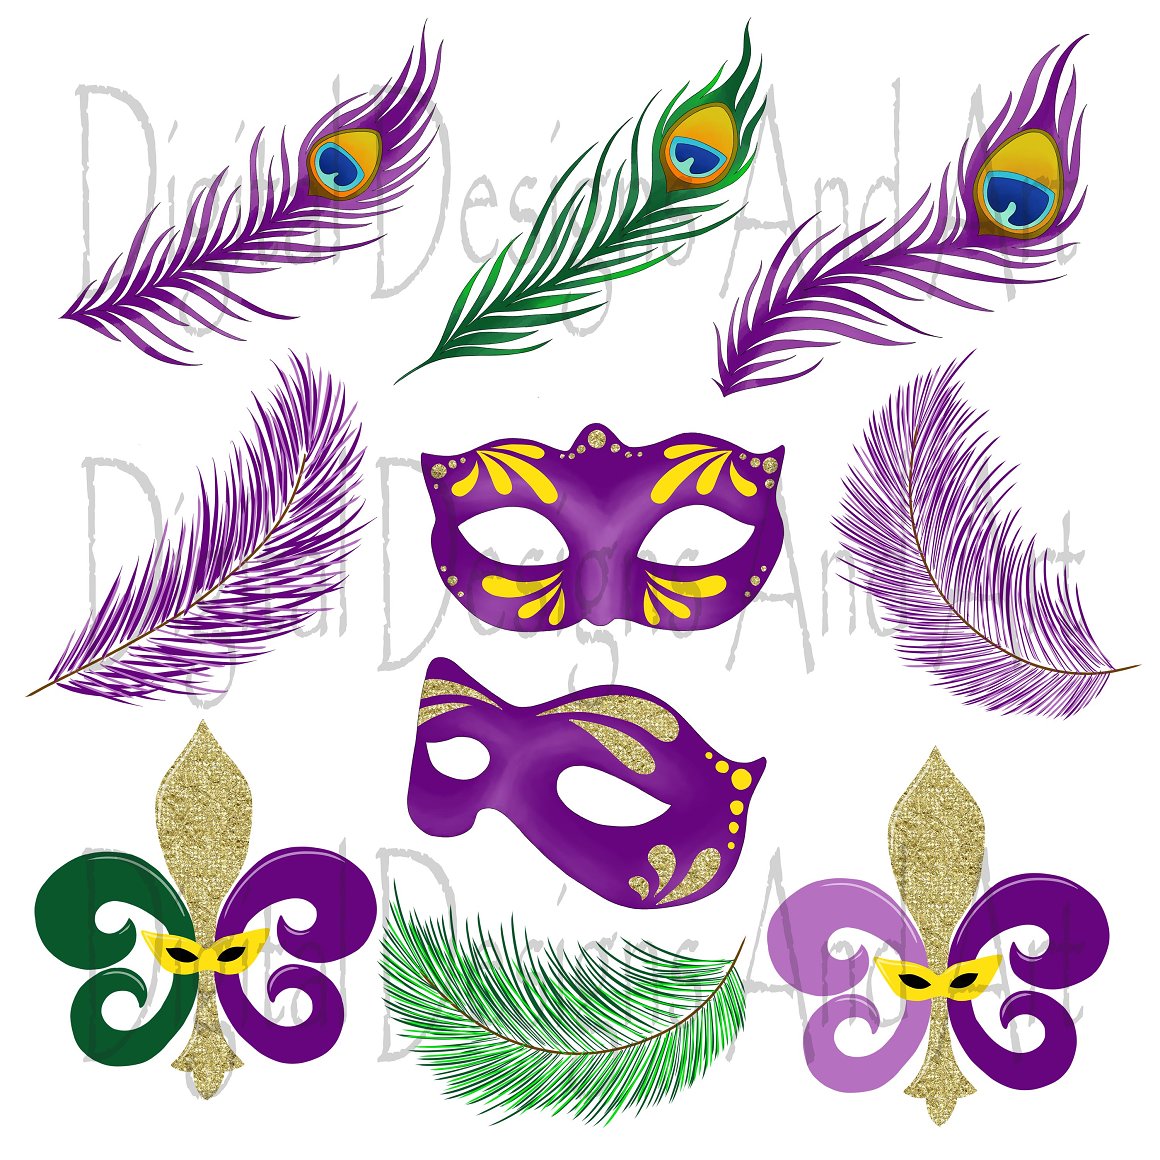 Purple masks and feathers.